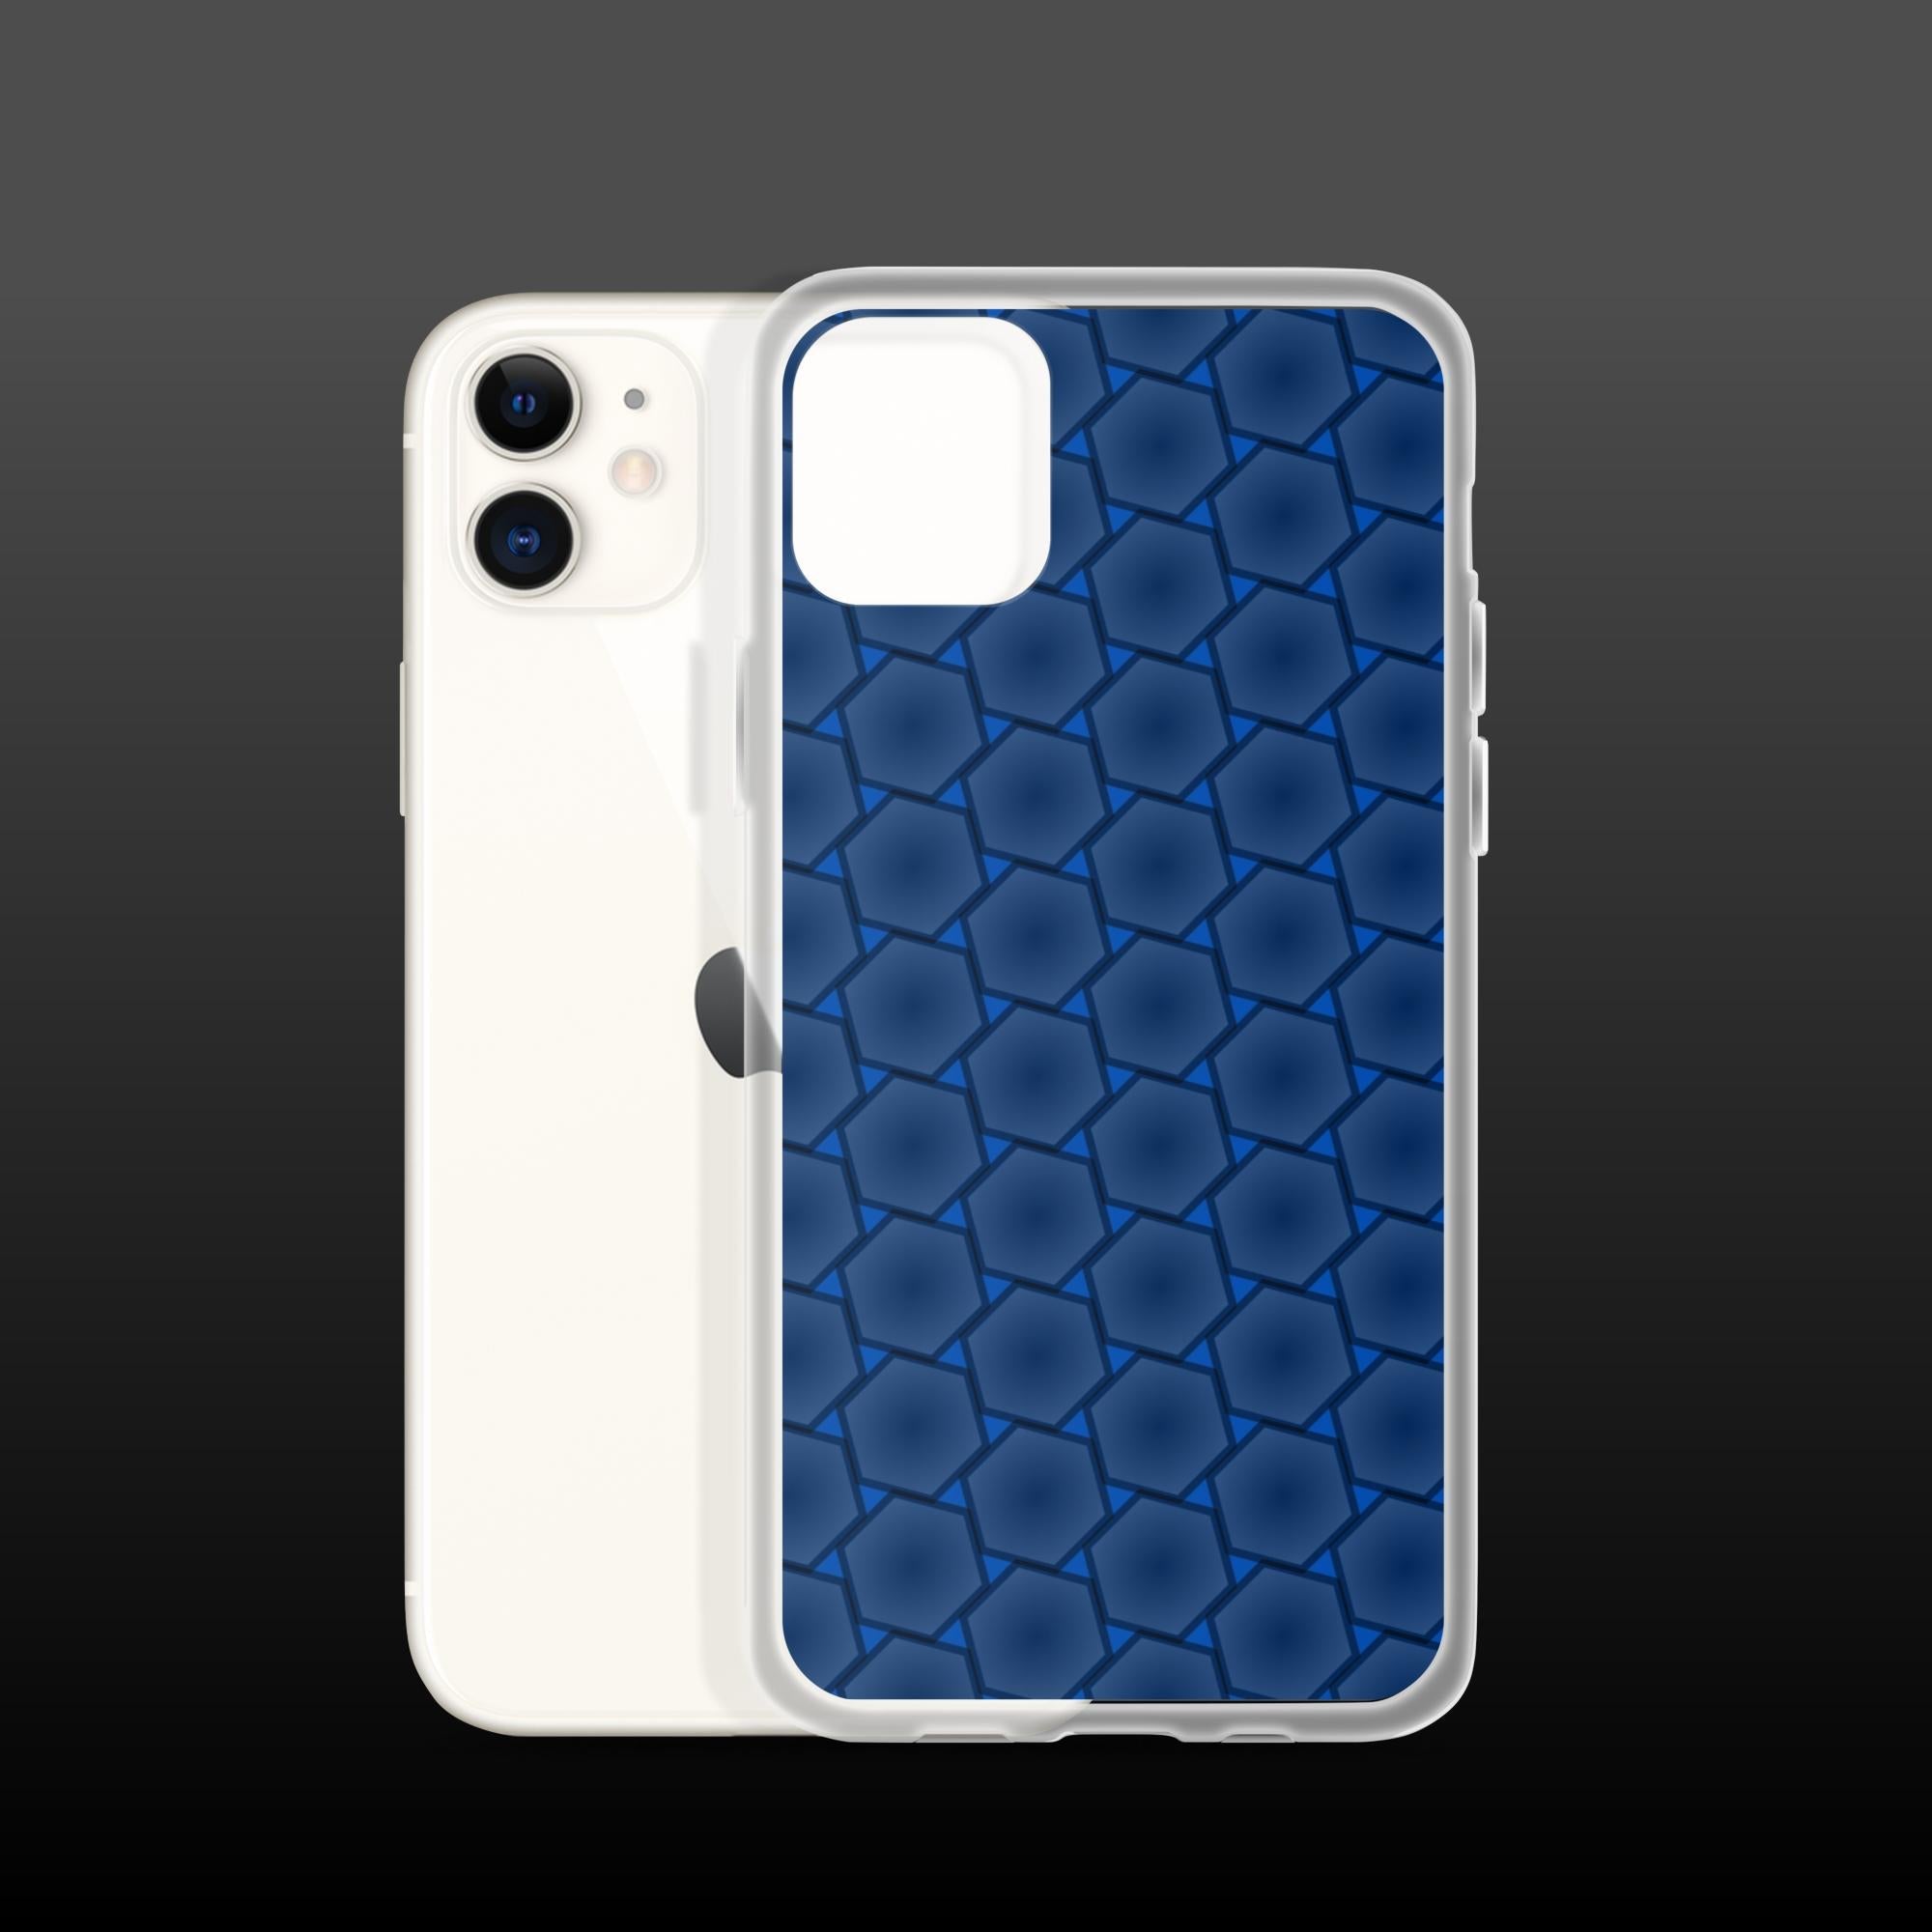 "Dence hexagons grid" clear iphone case - Clear iphone case - Ever colorful